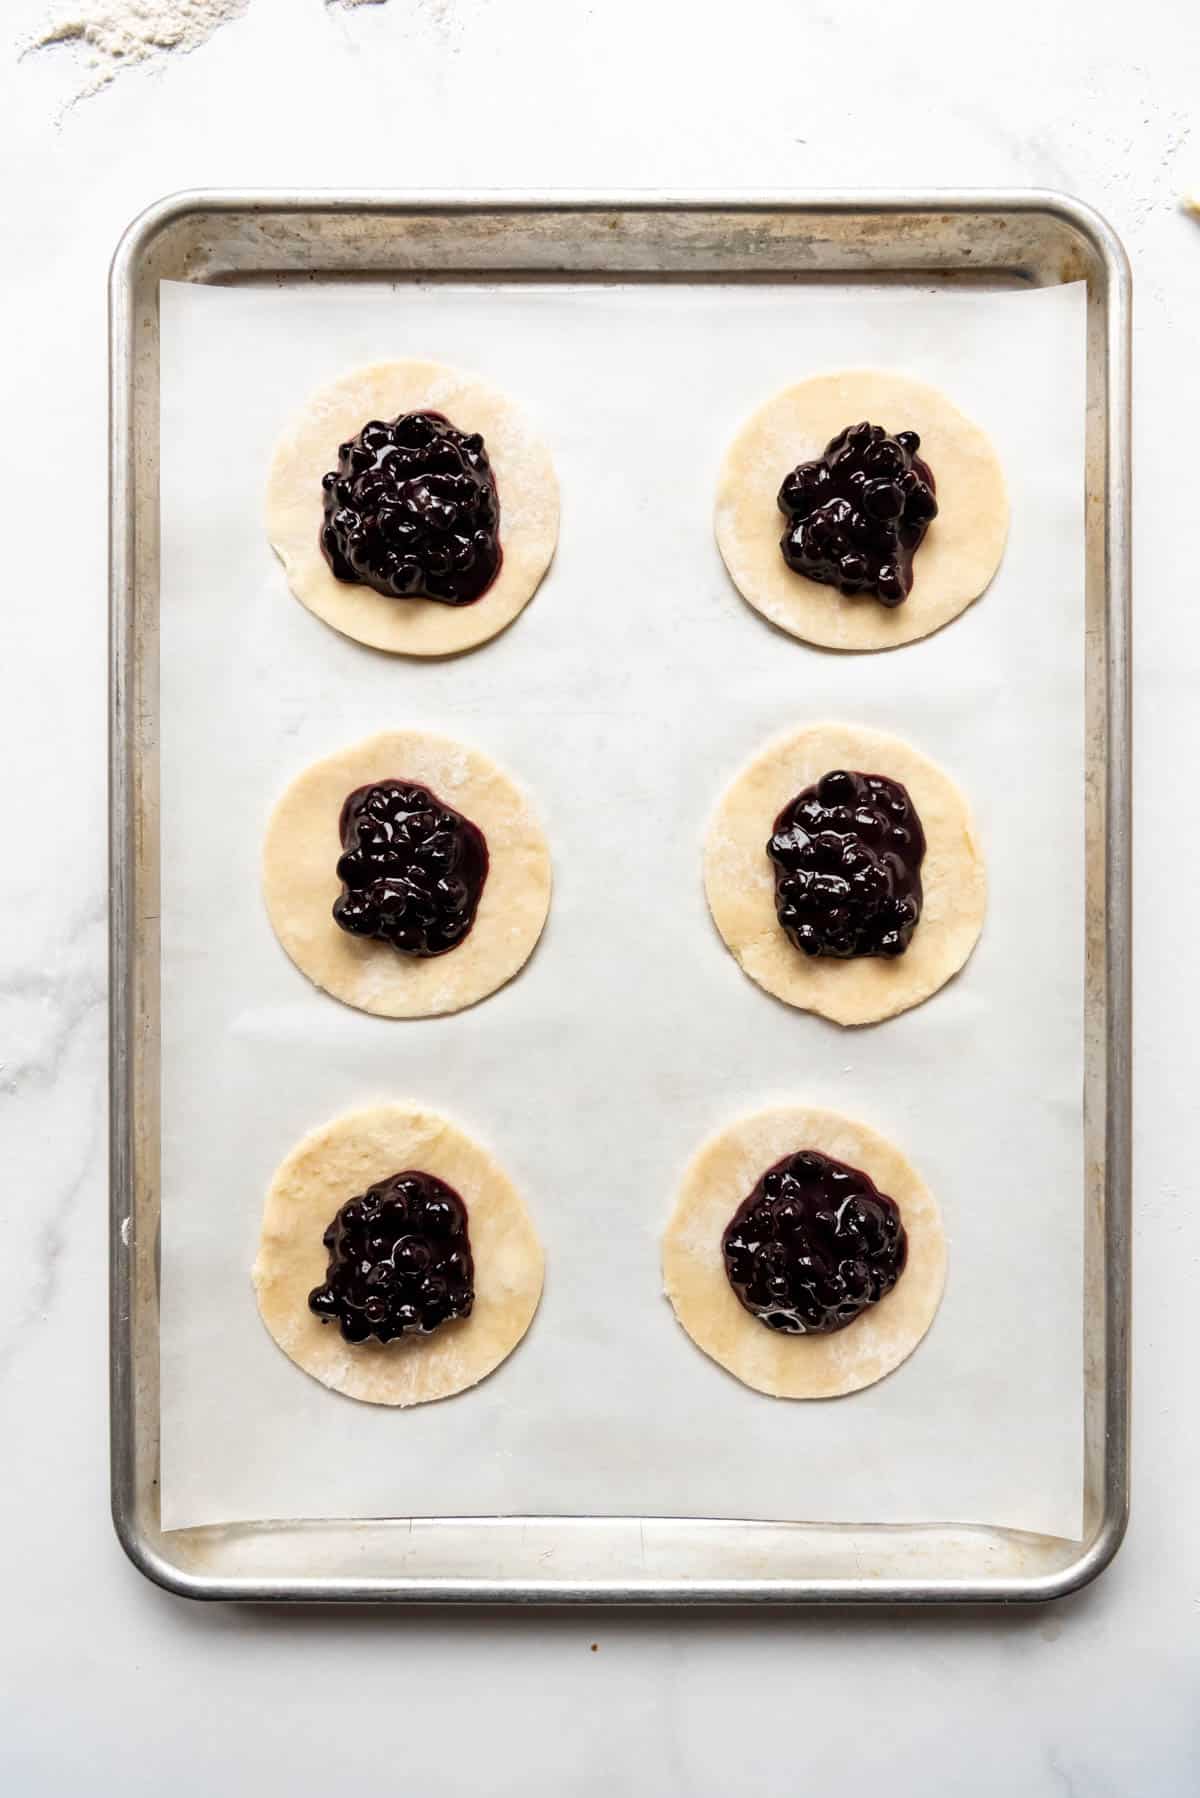 Adding blueberry pie filling to circles of pie crust on a baking sheet to make hand pies.